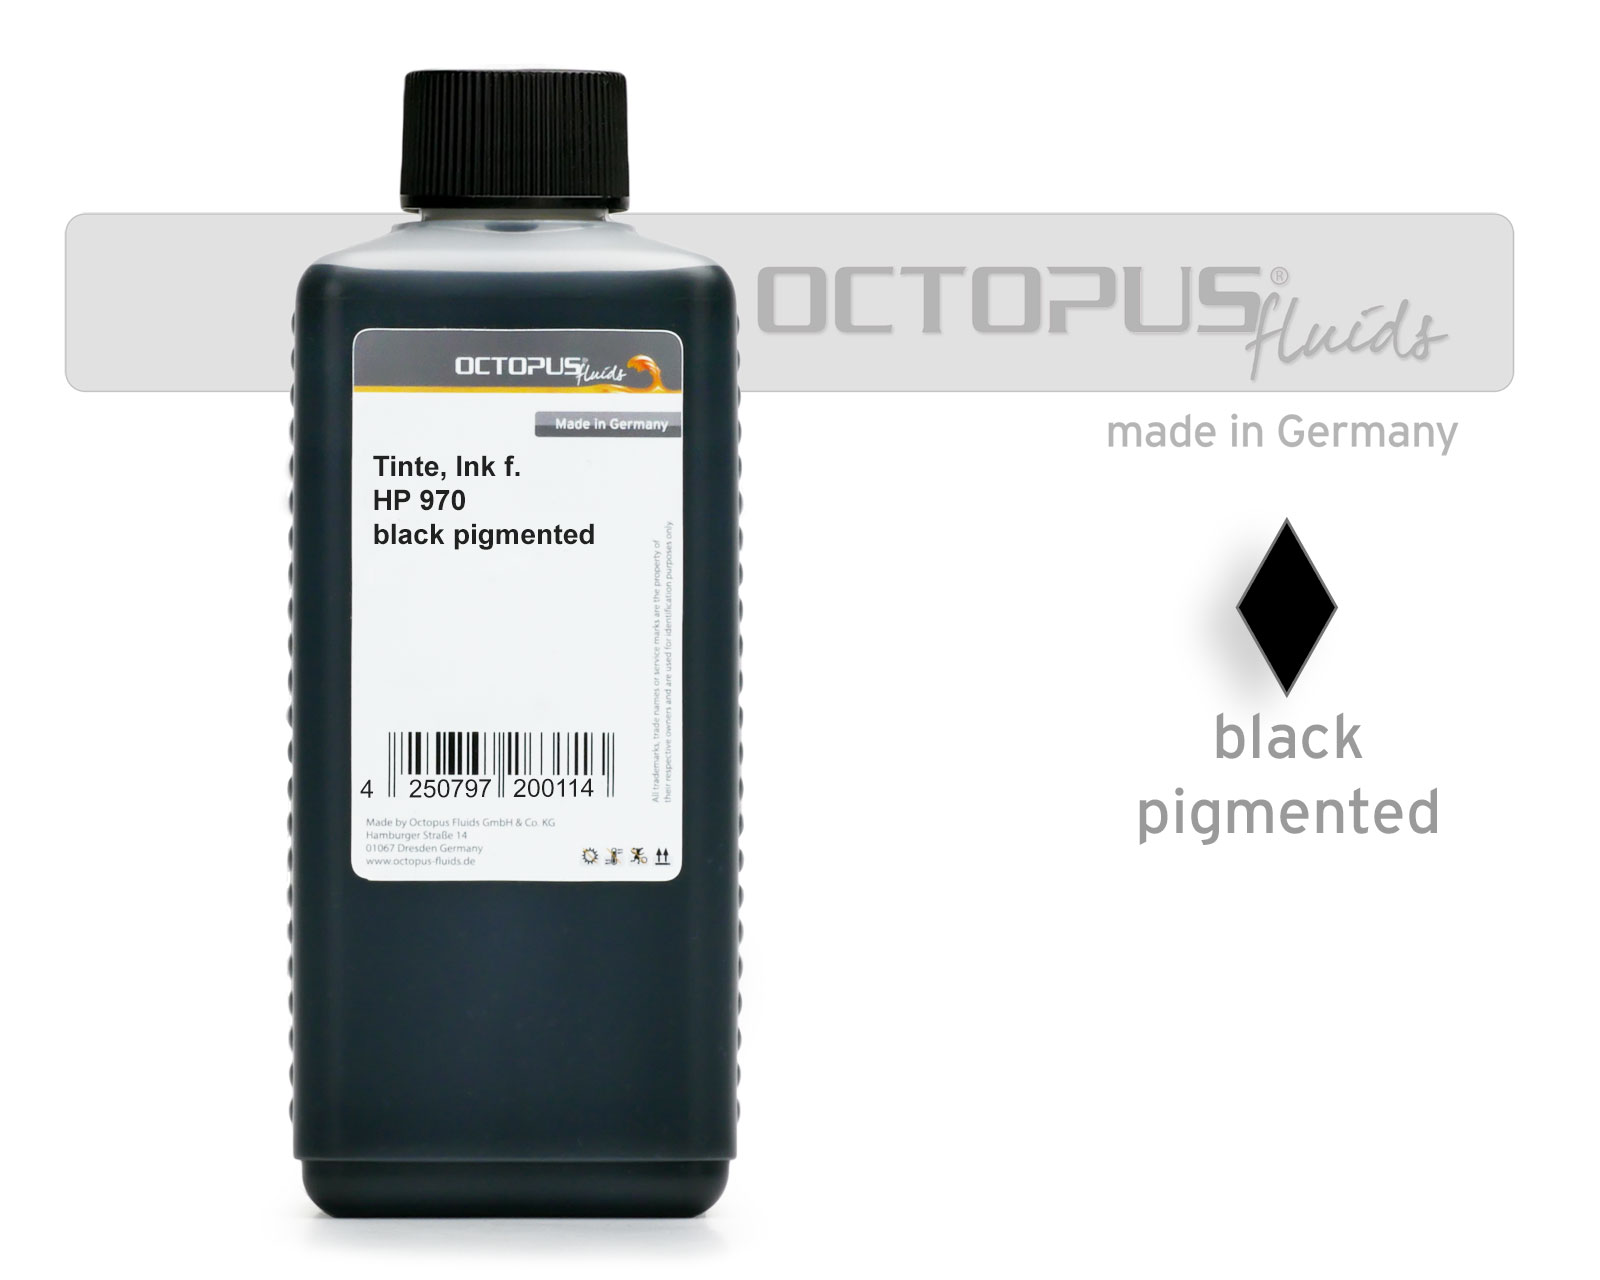 Octopus refill ink for HP 970 black pigmented